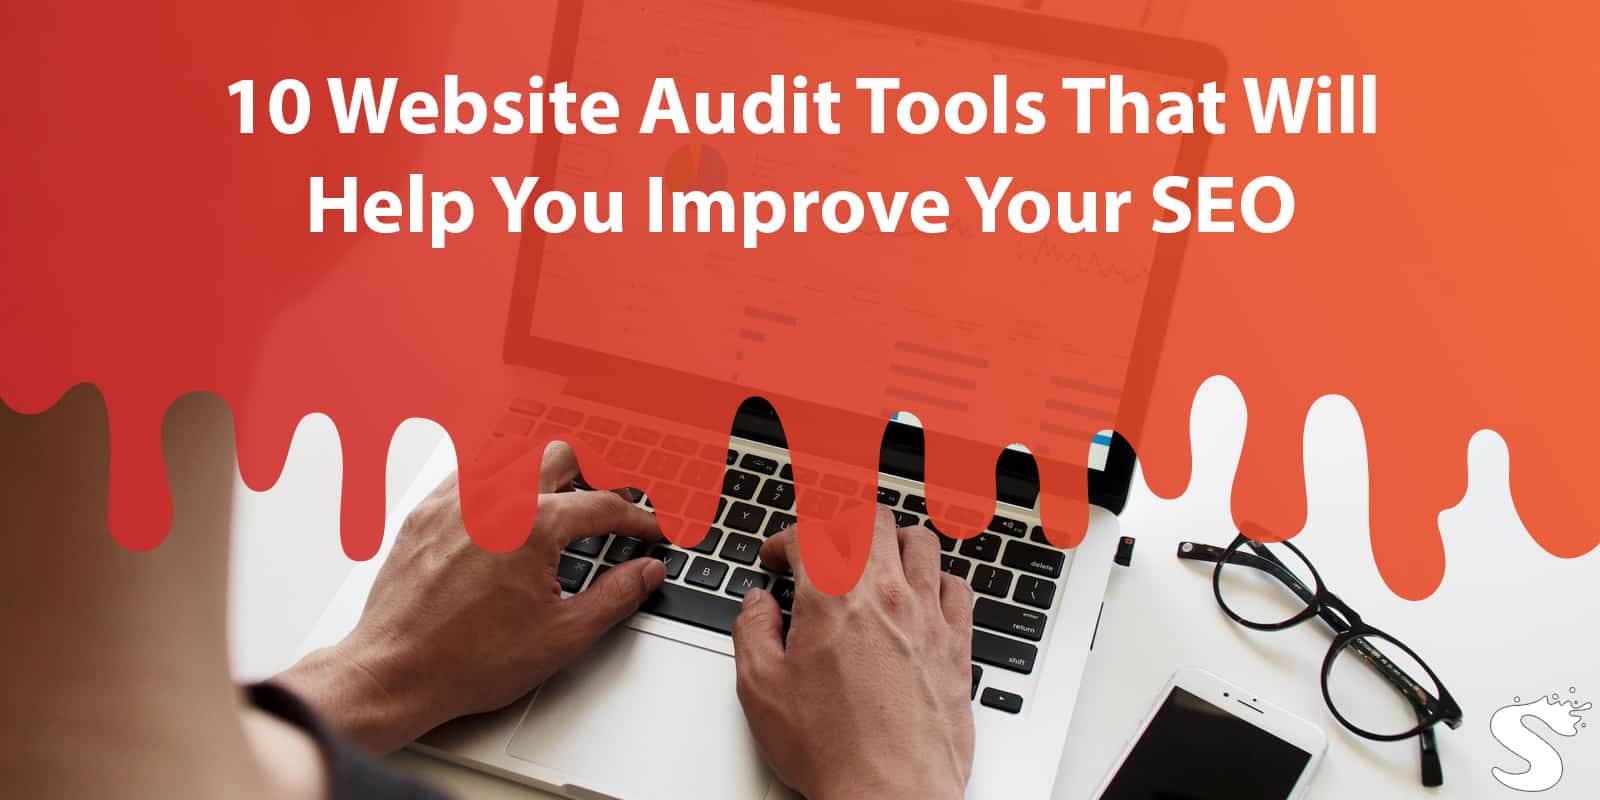 10 Website Audit Tools That Will Help You Improve Your SEO